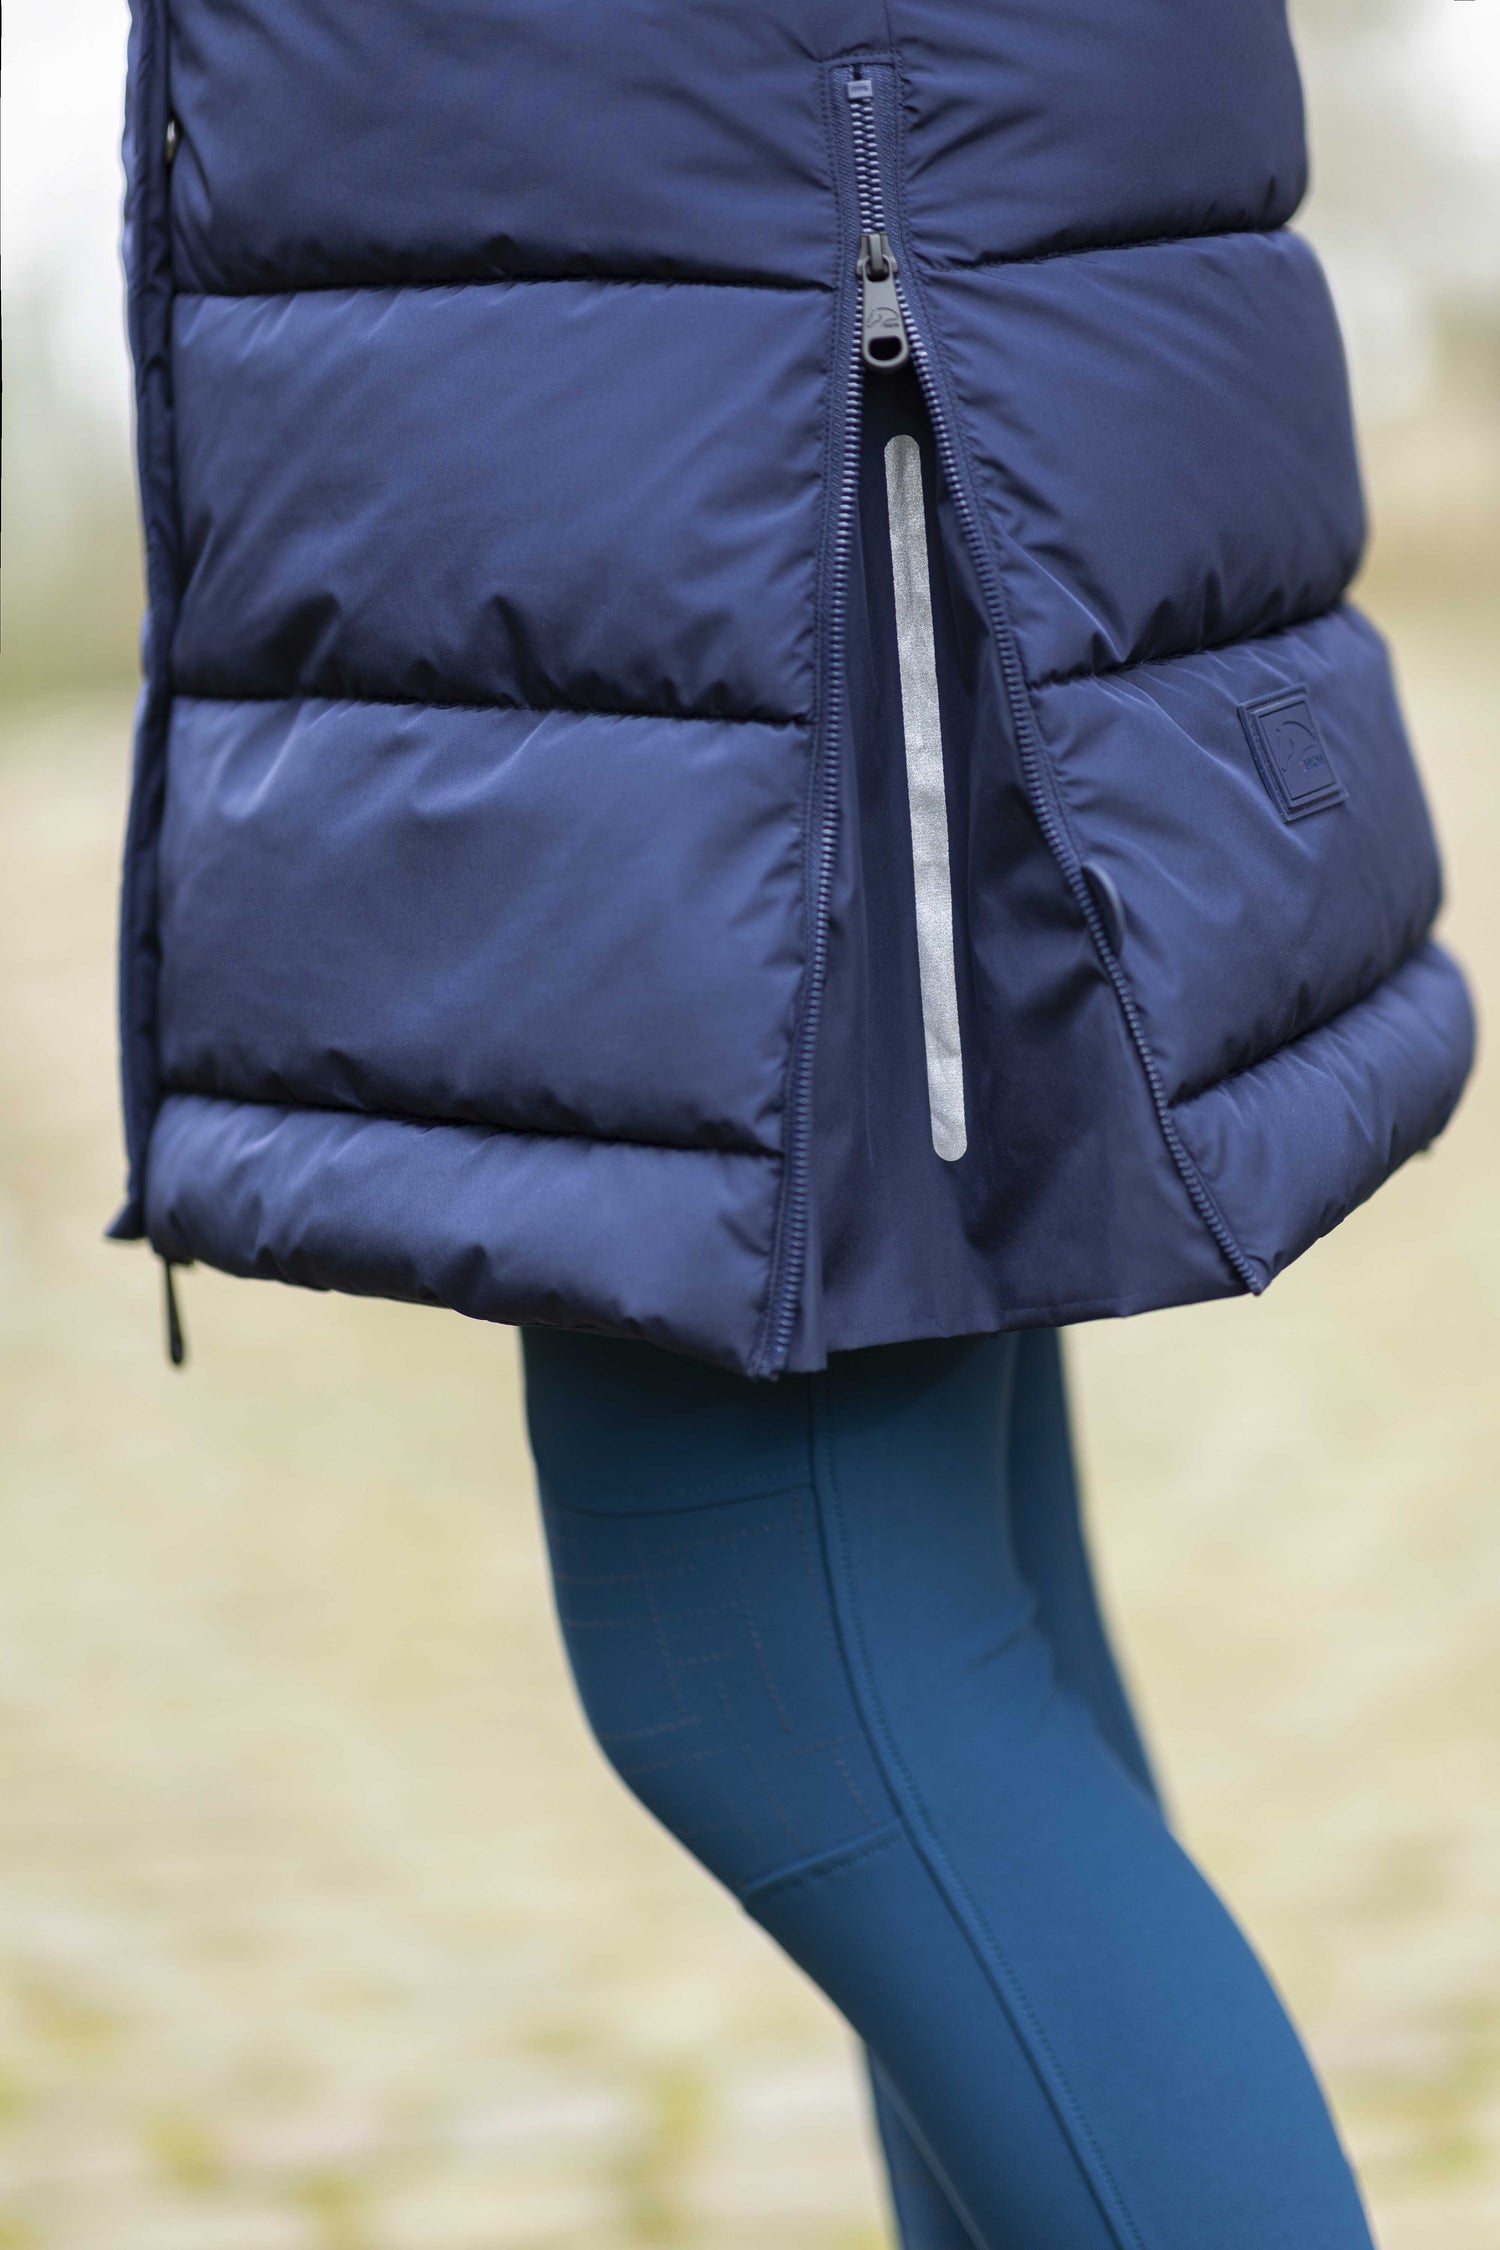 Horse riding vest with side zips